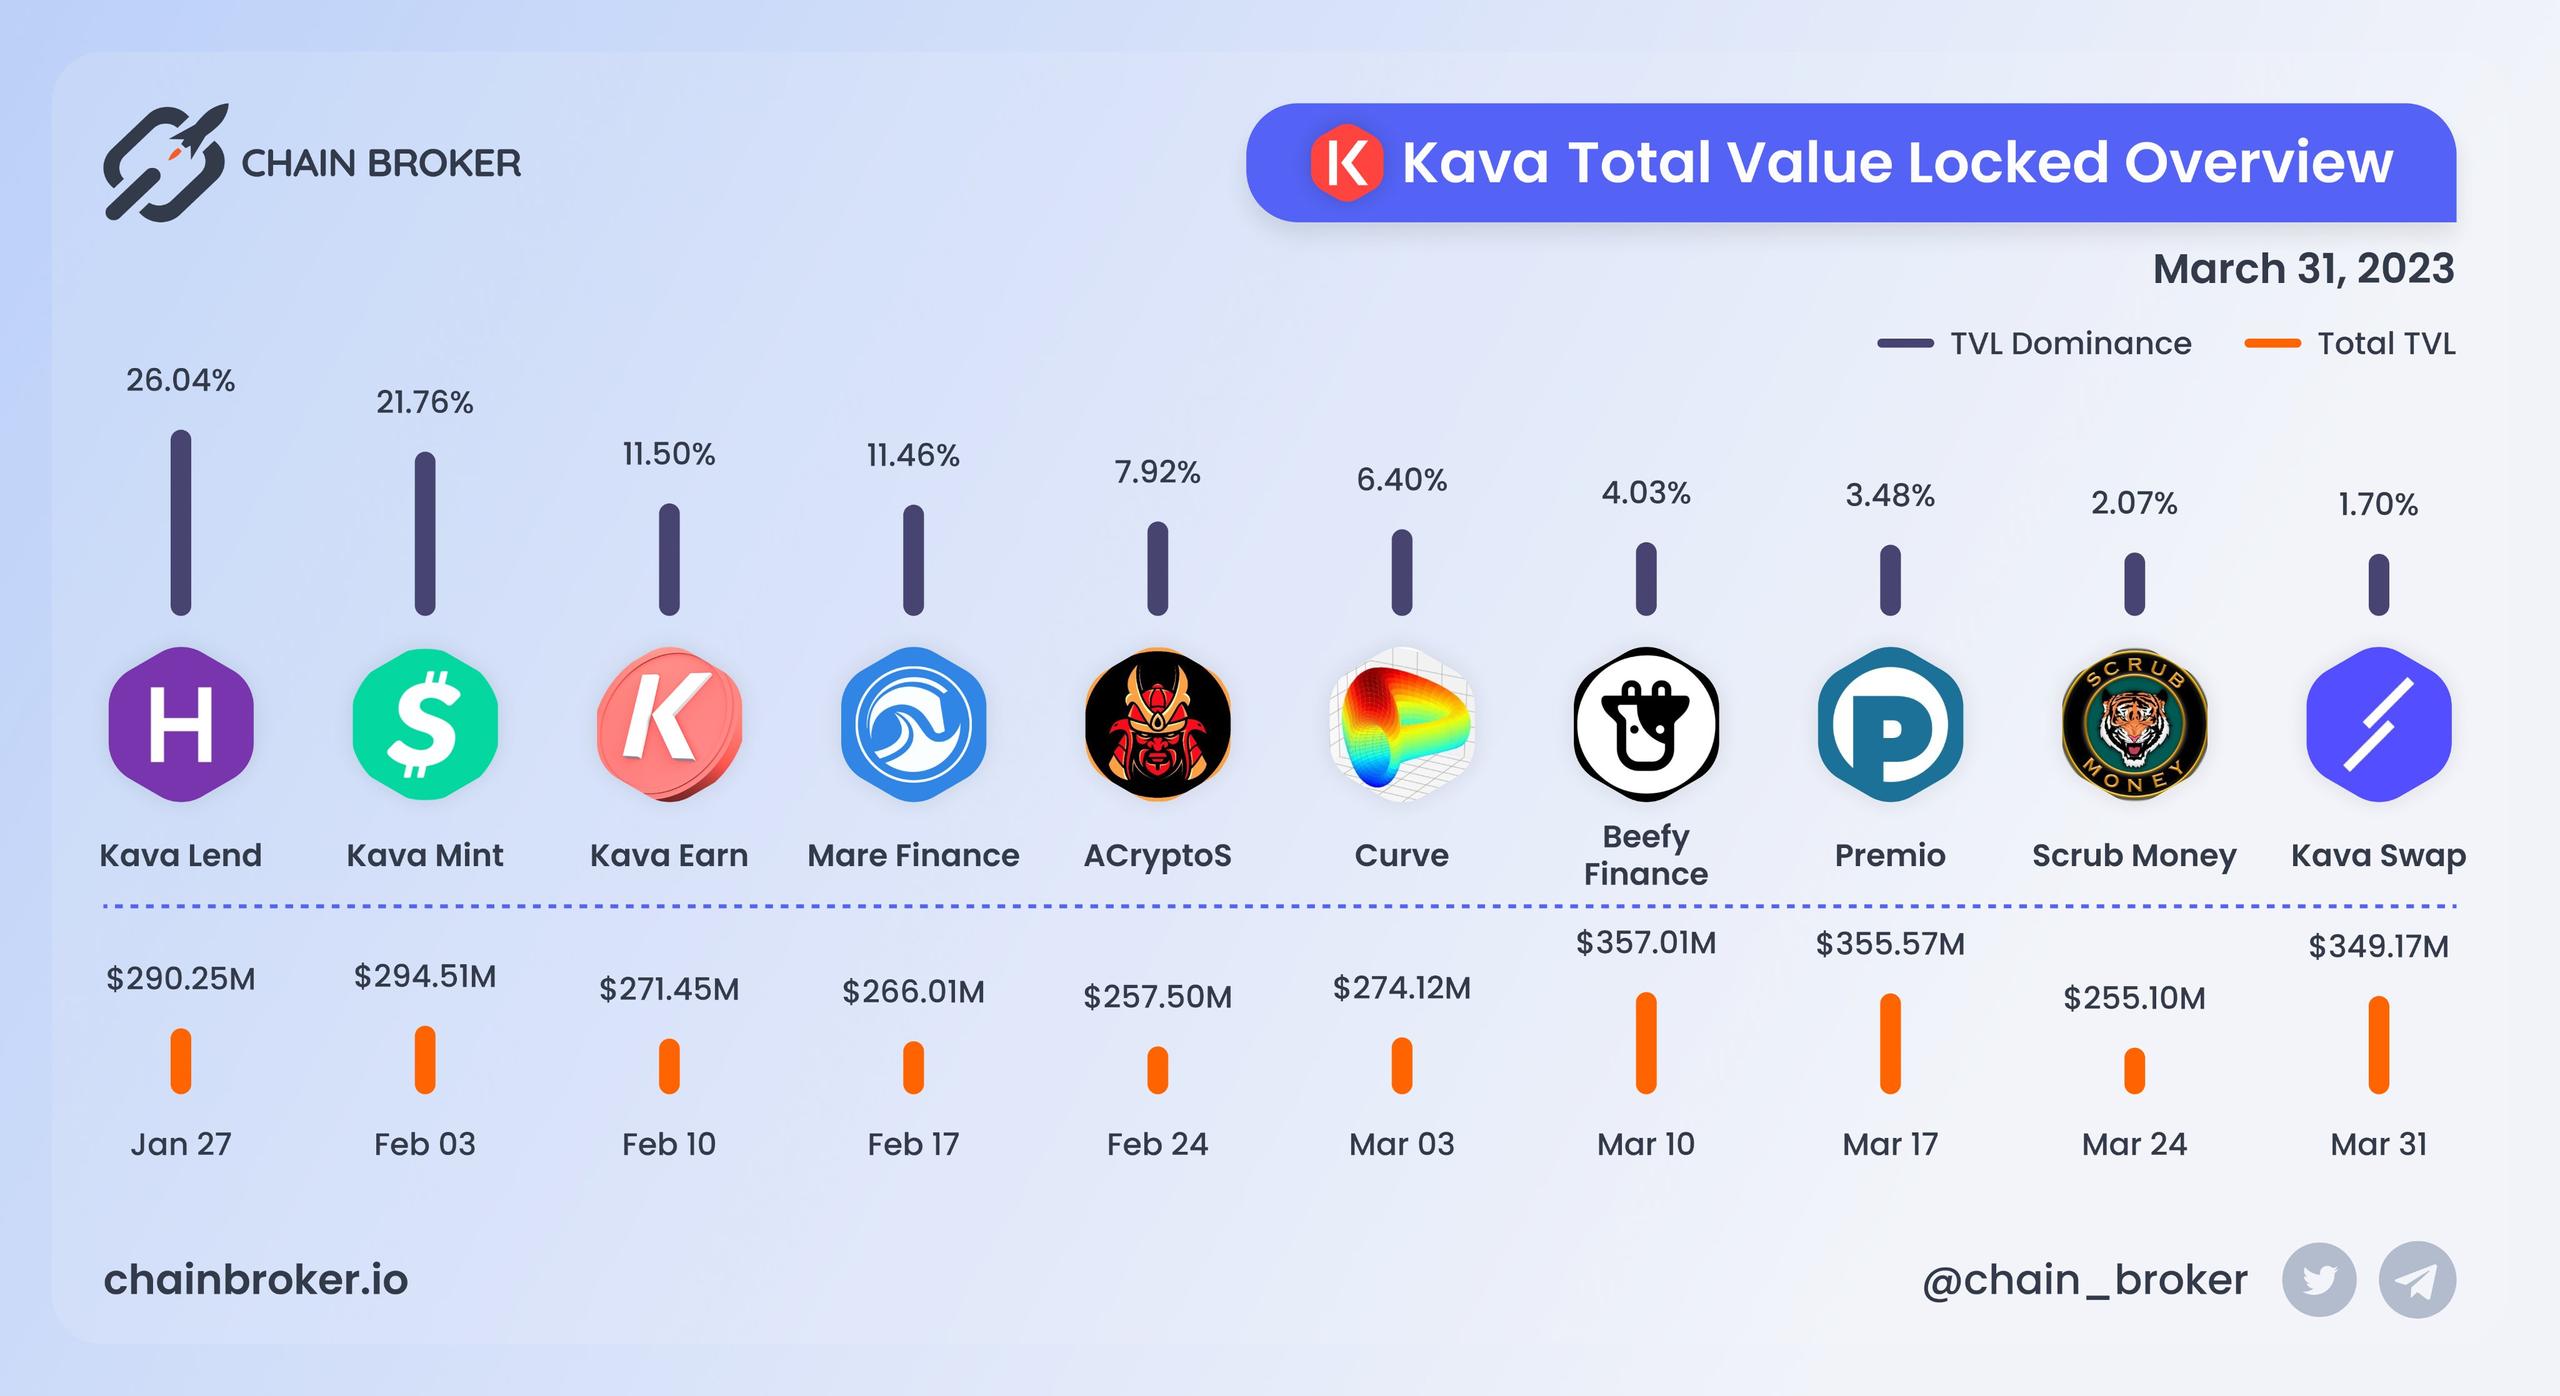 Kava total value locked overview